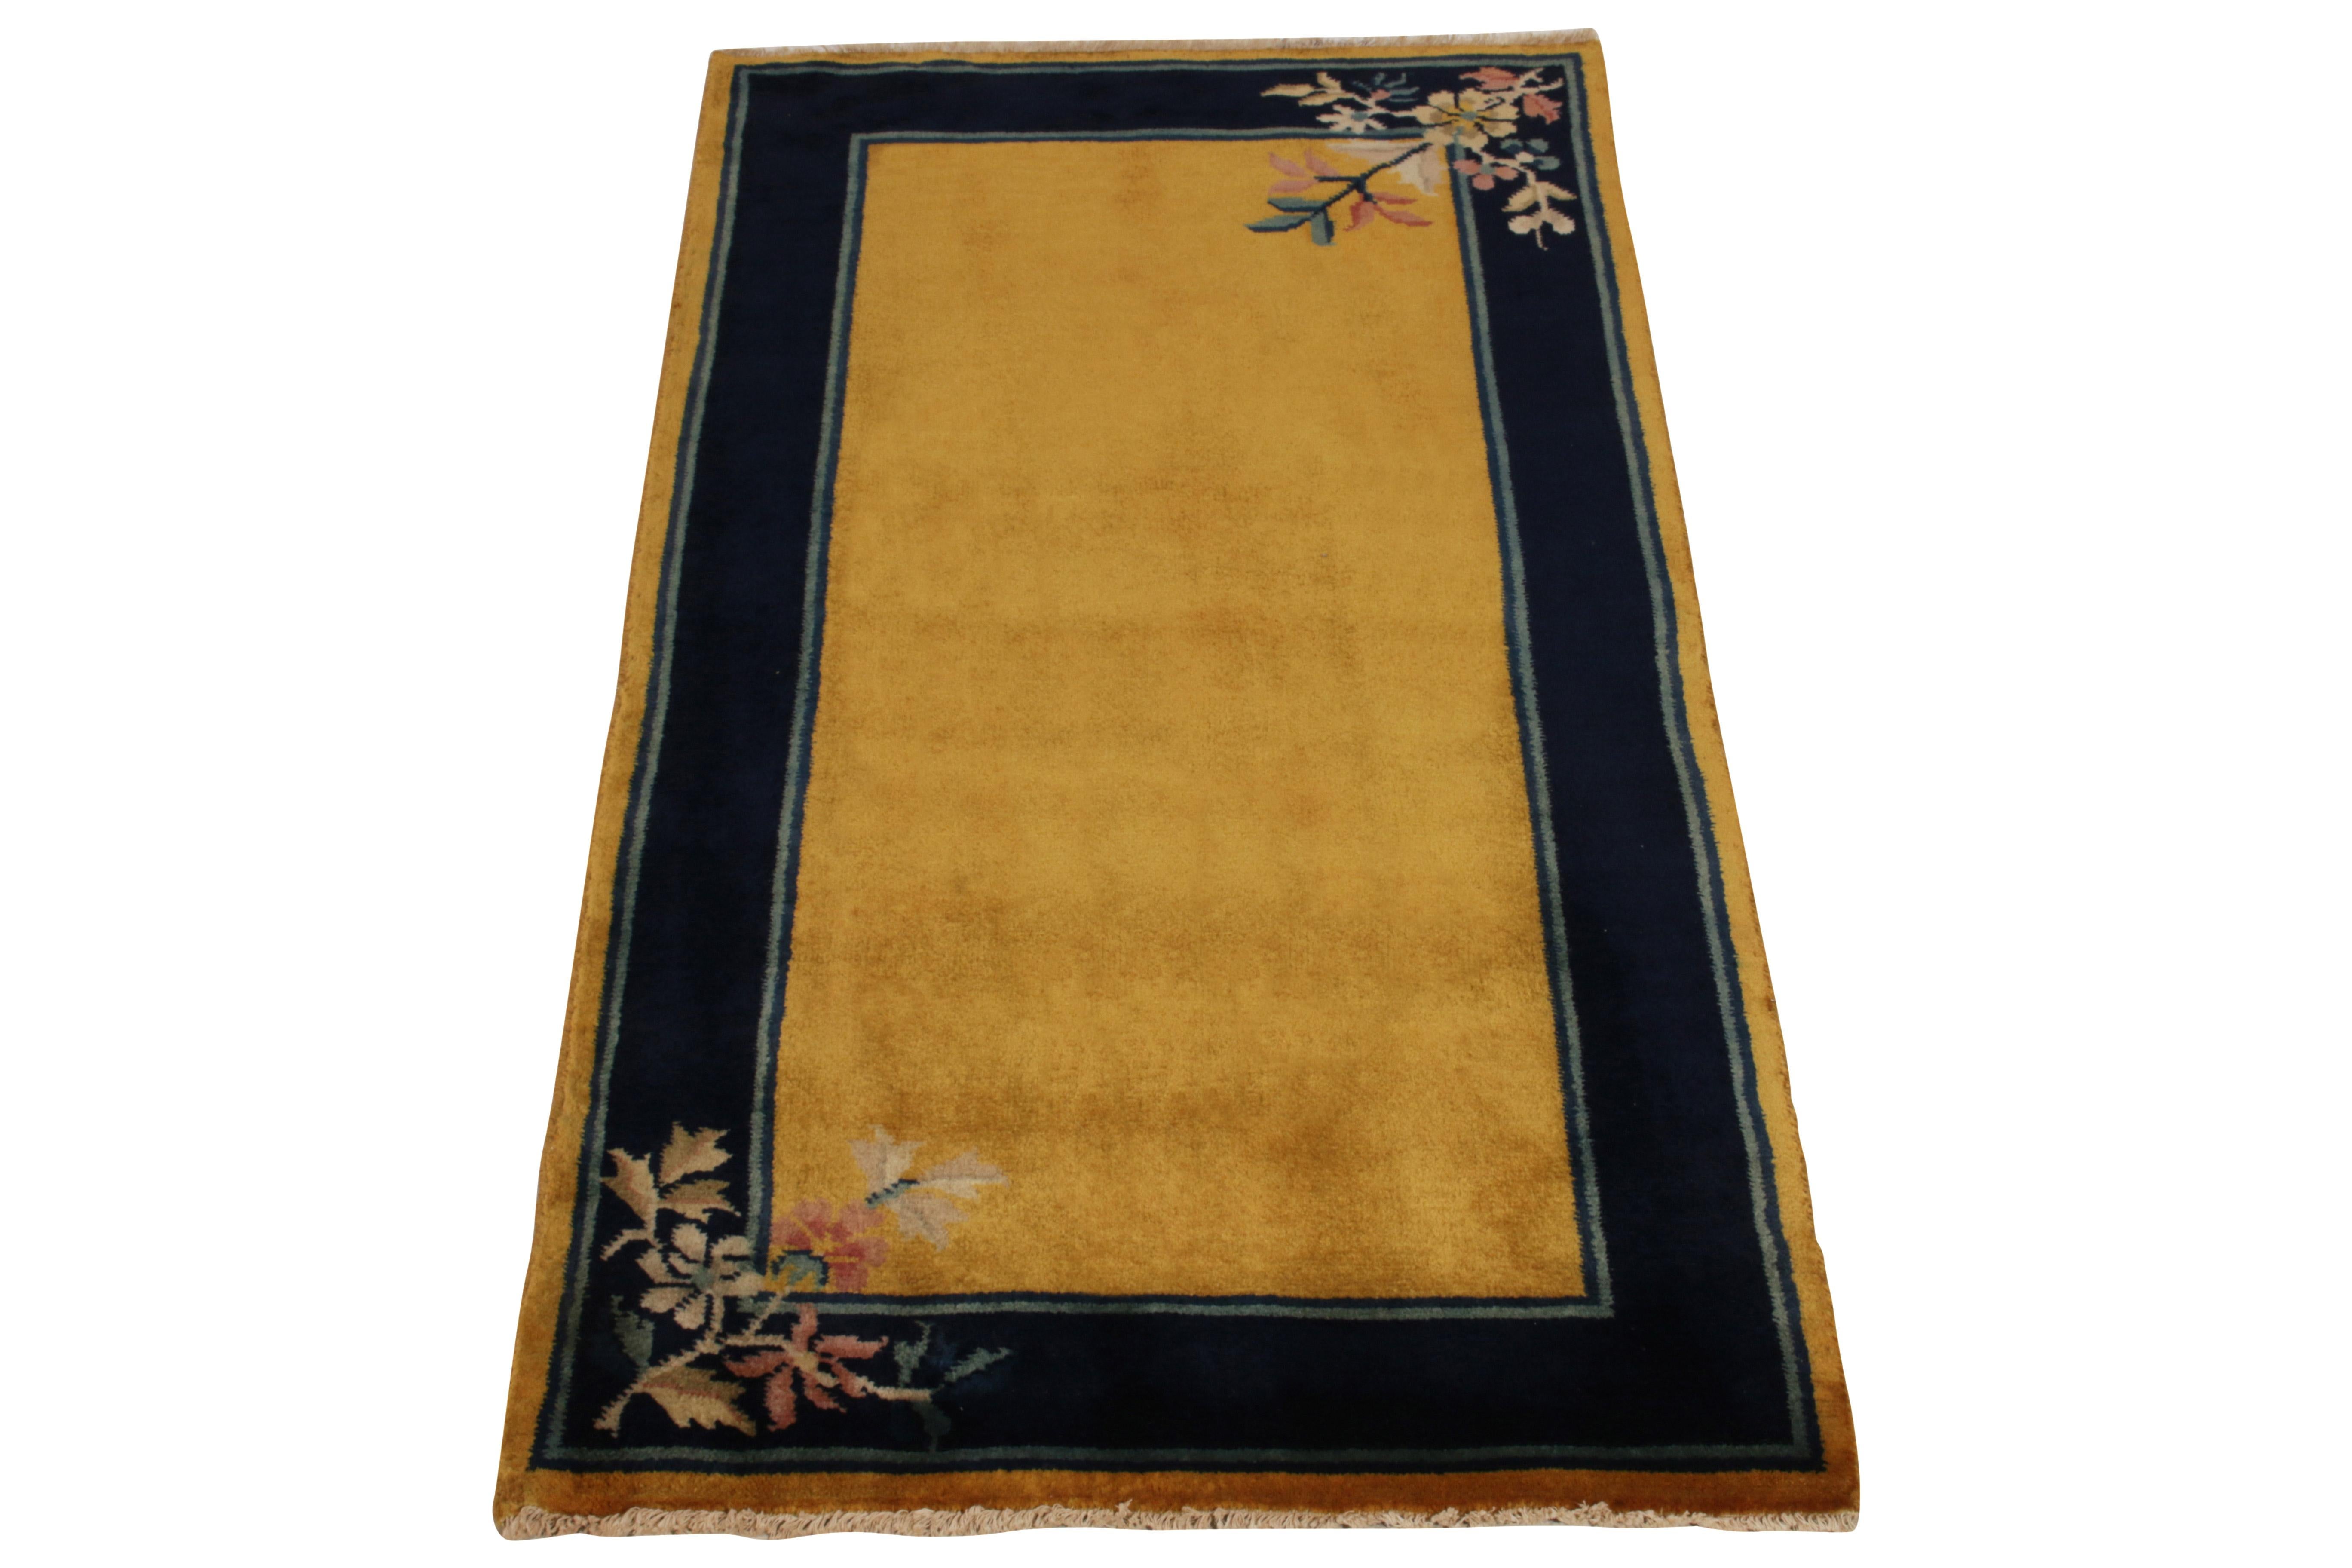 Hand-knotted in wool, a 2x5 Art Deco rug from our Antique & Vintage collection exemplifying the Chinese sensibilities of the 1920s. The floral pattern flourishing in brown, red, green tones sits comfortably on a rich blue border - sandwiched between